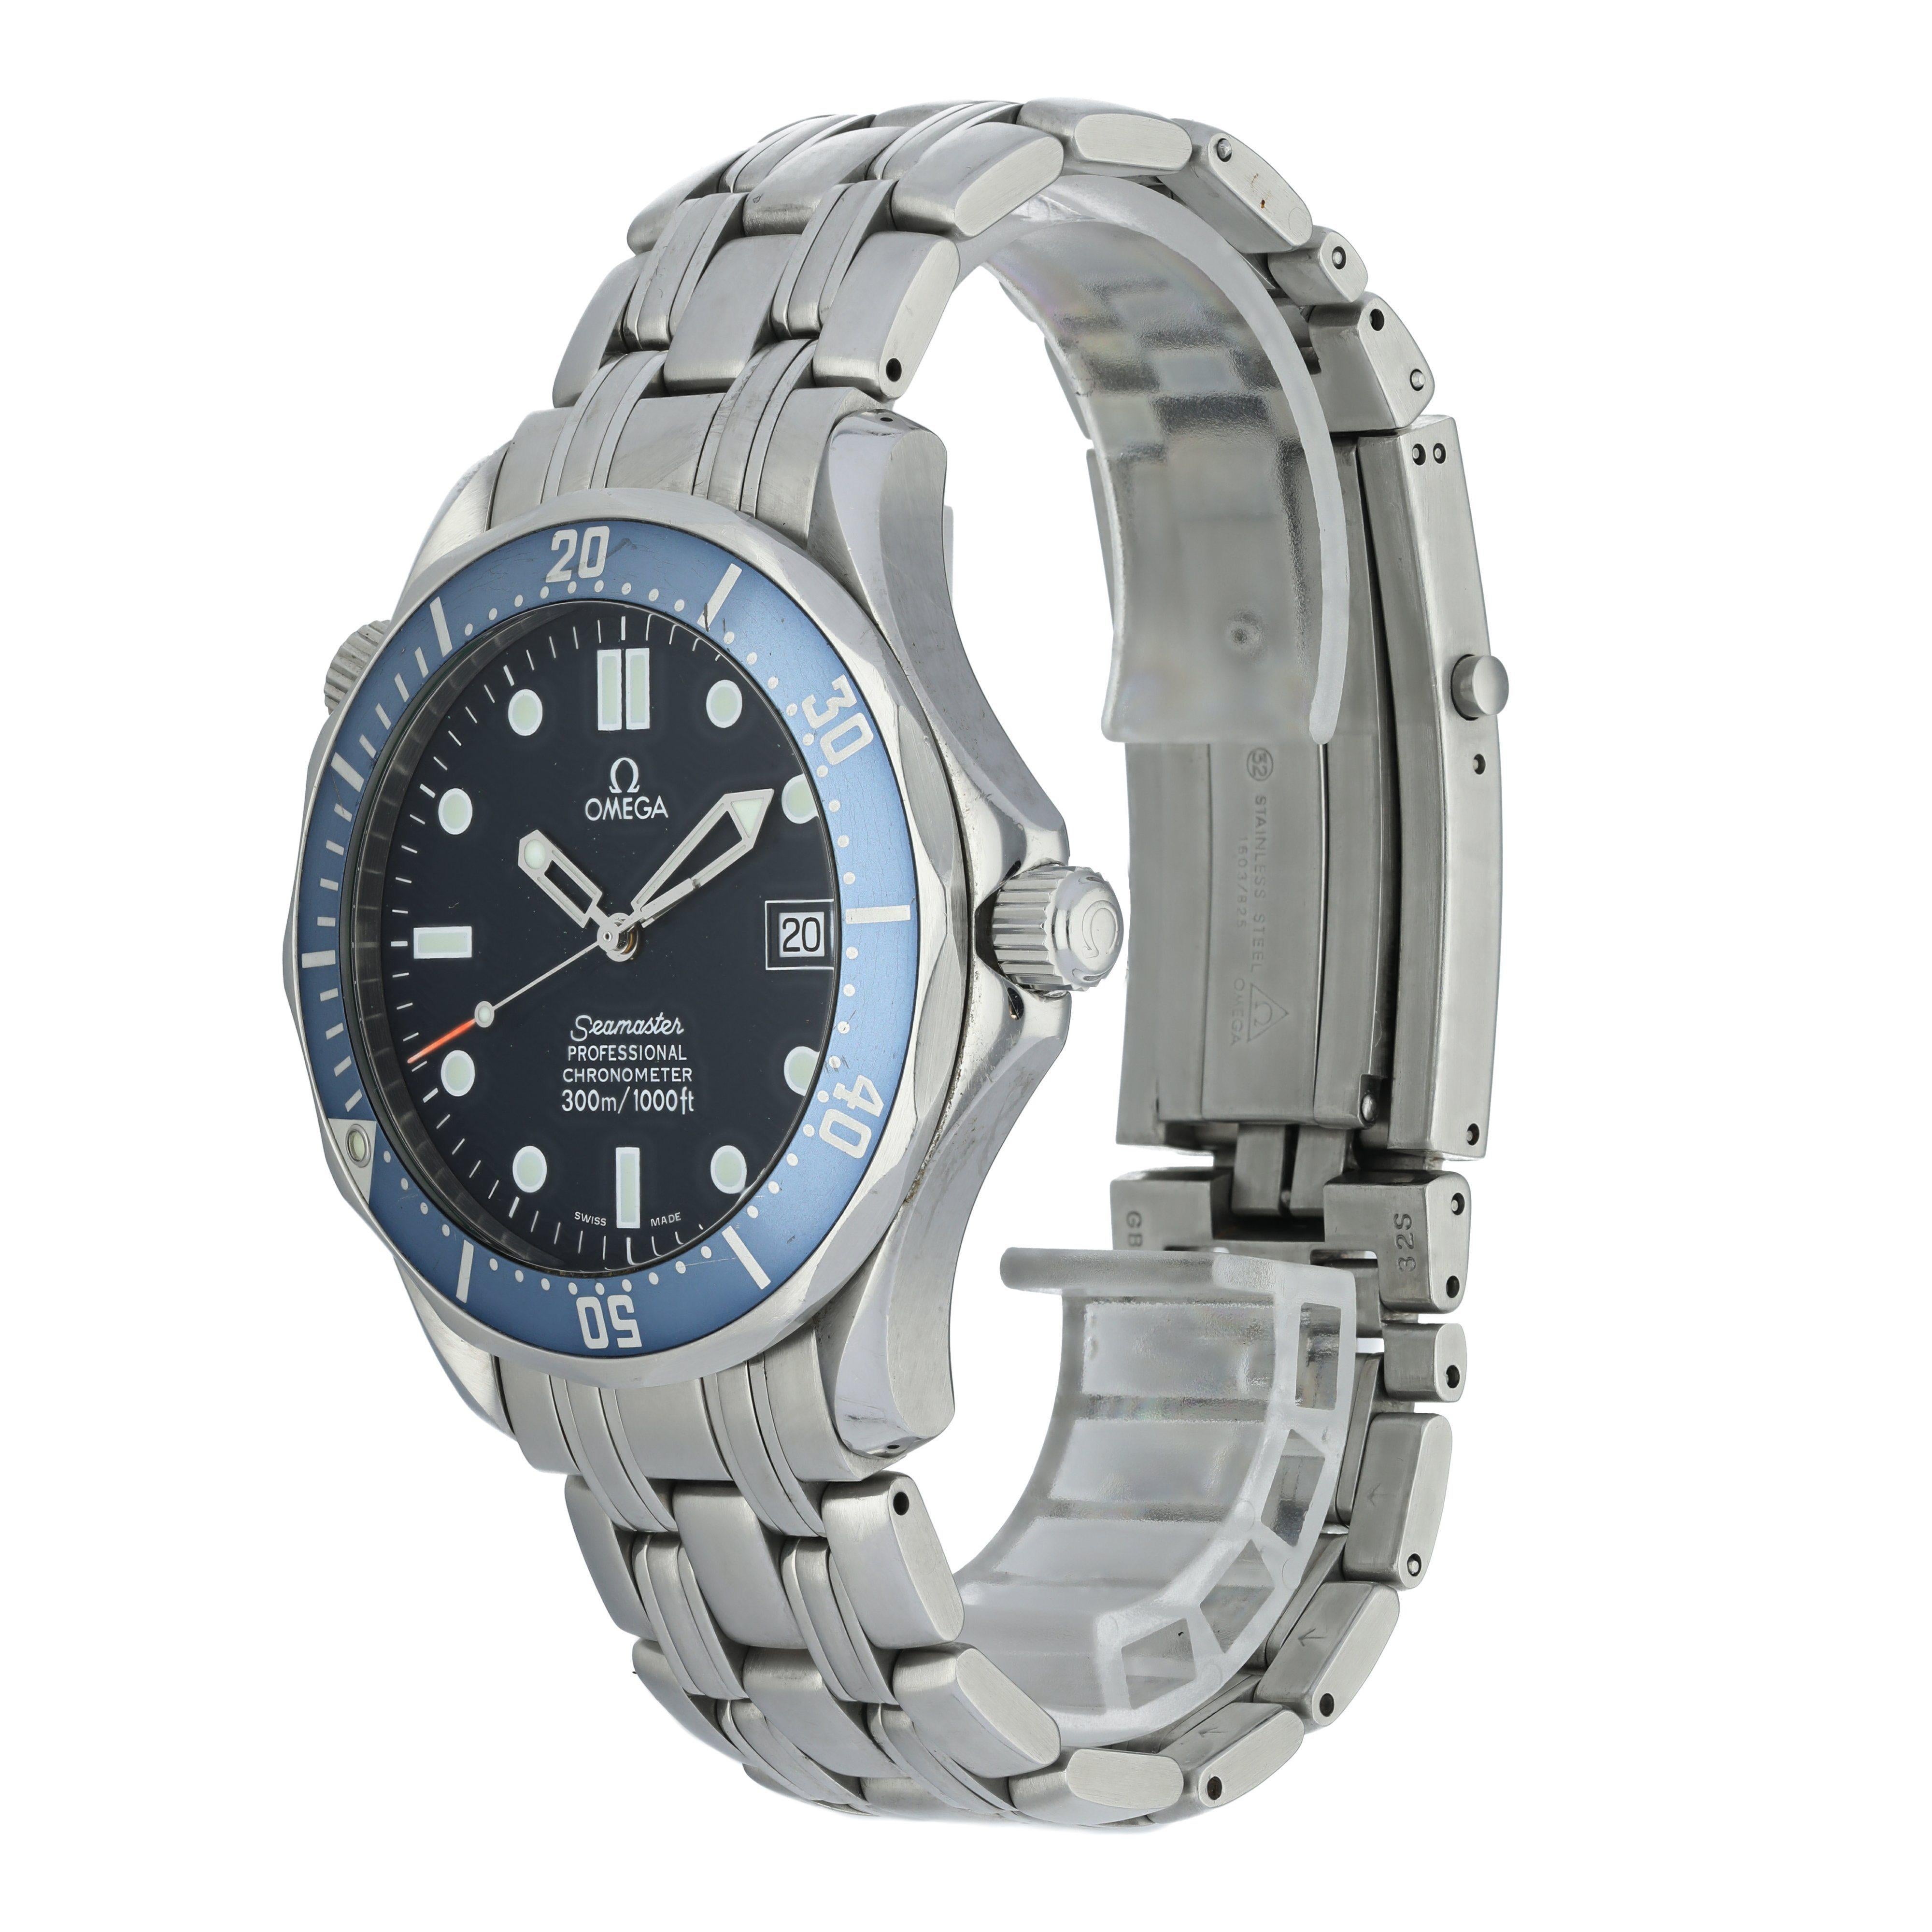 Omega Seamaster 2531.80.00 Men's Watch. 41mm Stainless Steel case with Stainless Steel Unidirectional rotating bezel. Blue dial with Luminous Steel hands and luminous dot hour markers. Minute markers on the outer dial. Date display at the 3 o'clock